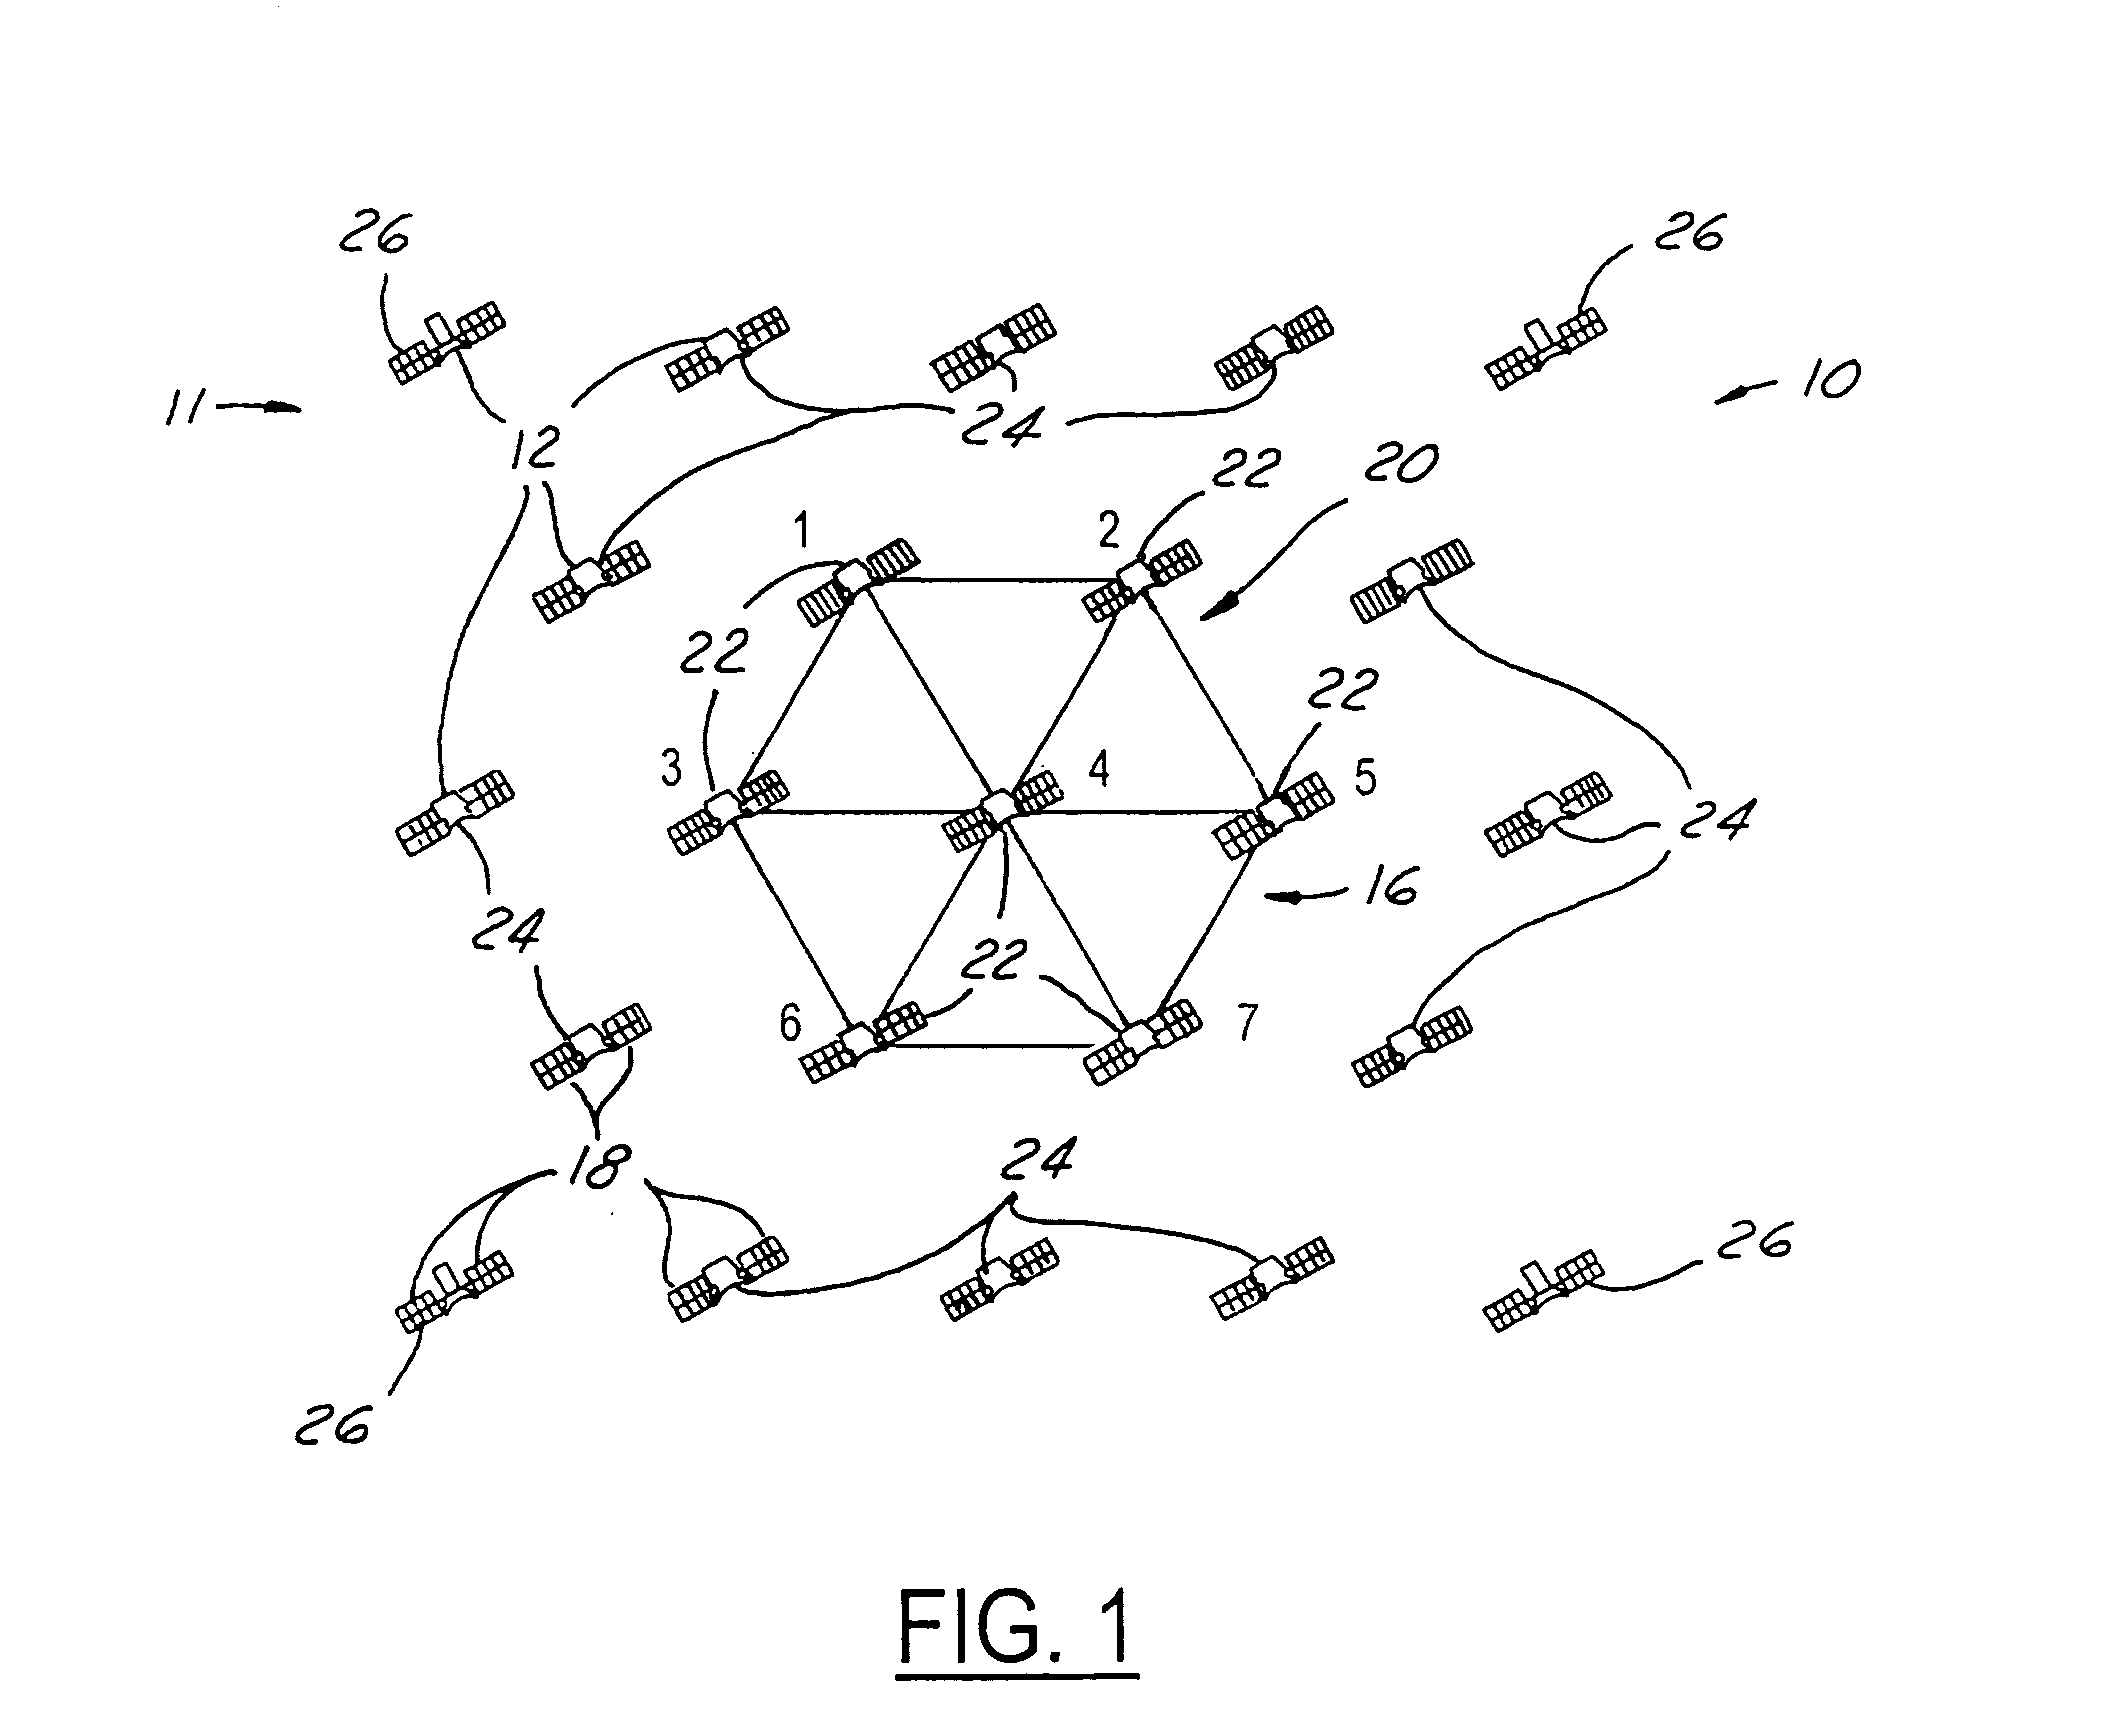 Architecture for an optical satellite communication network